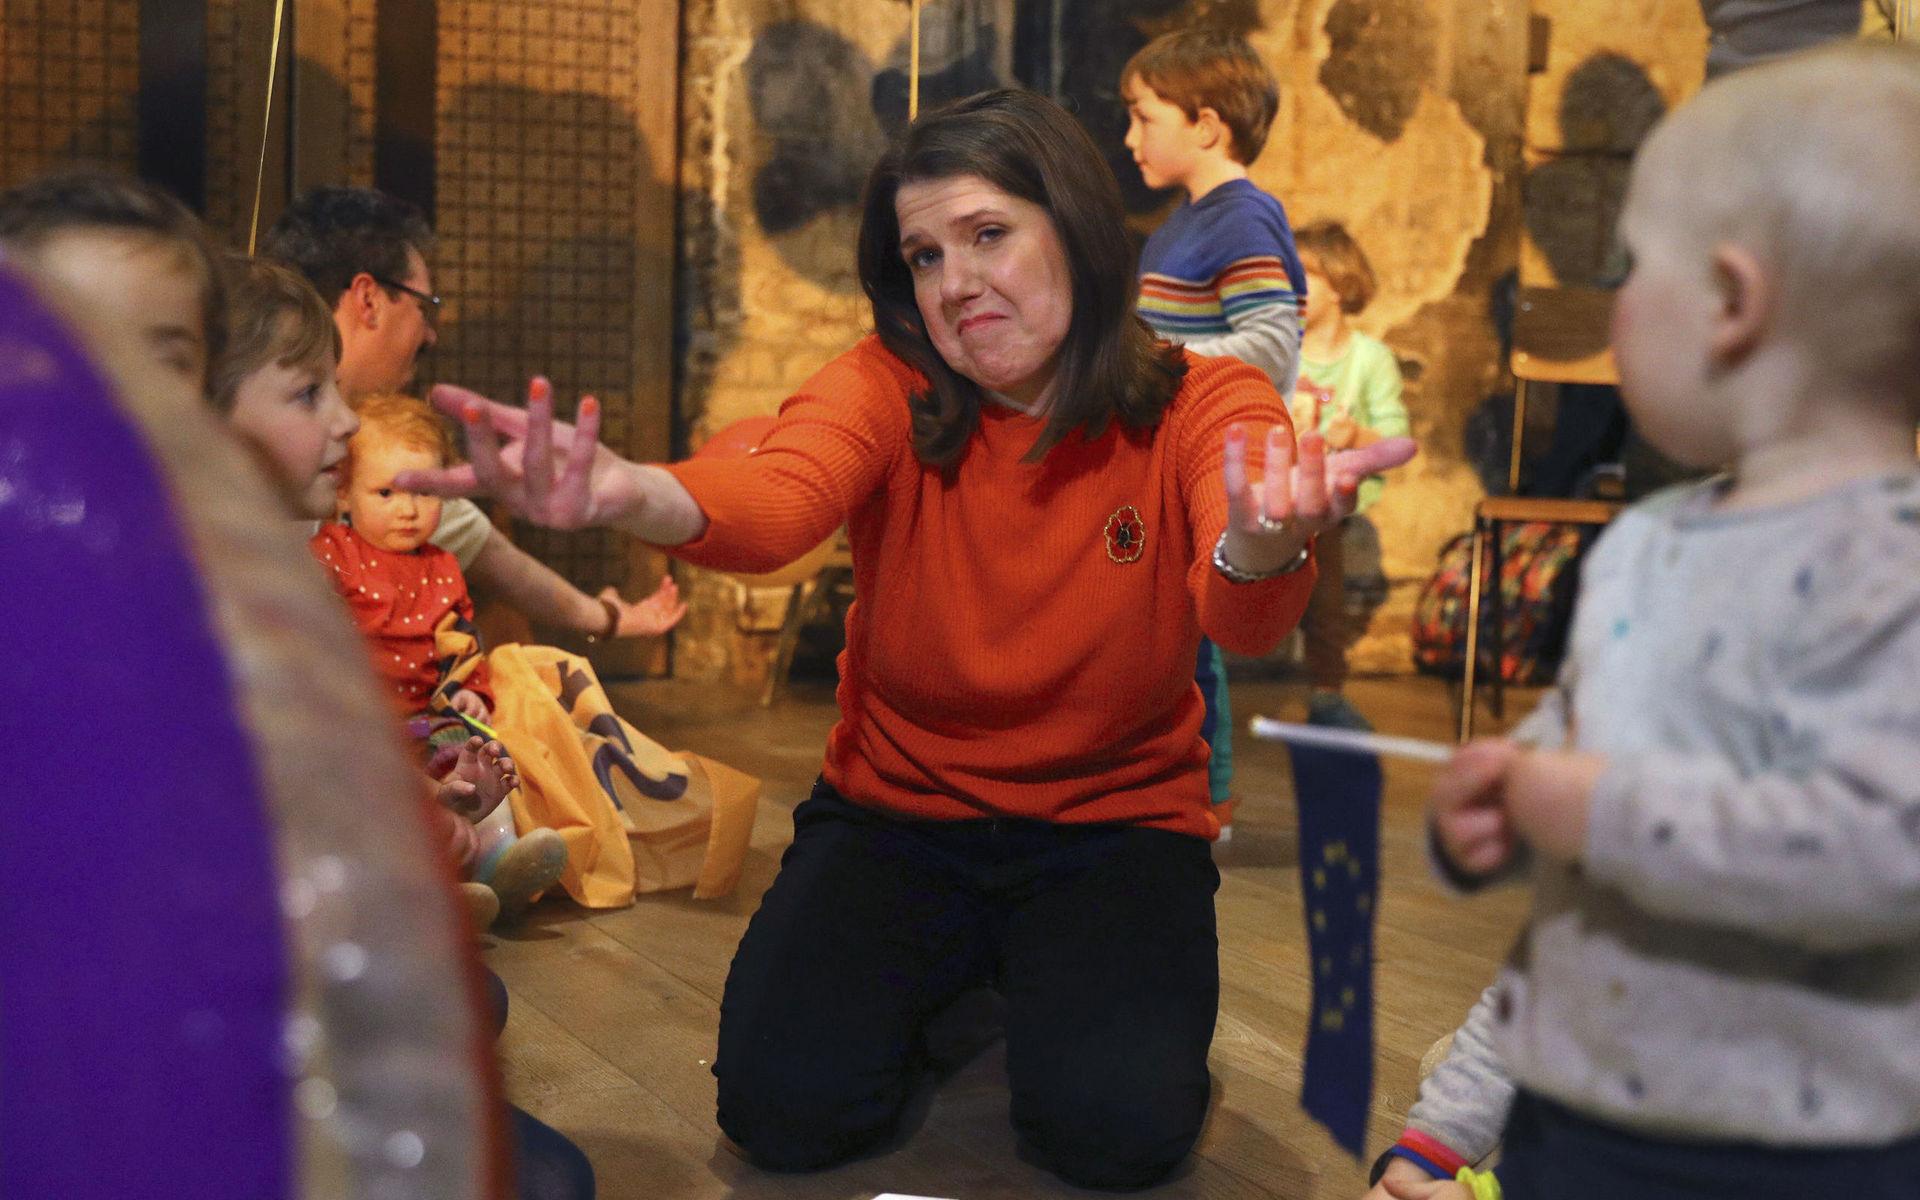 Britain&apos;s Liberal Democrats leader Jo Swinson plays with children at the Battersea Arts Centre in Lavender Hill, while on the General Election campaign trail in London, Saturday, Nov. 9, 2019. Britain goes to the polls on Dec. 12.  (Aaron Chown/PA via AP)  AMB829